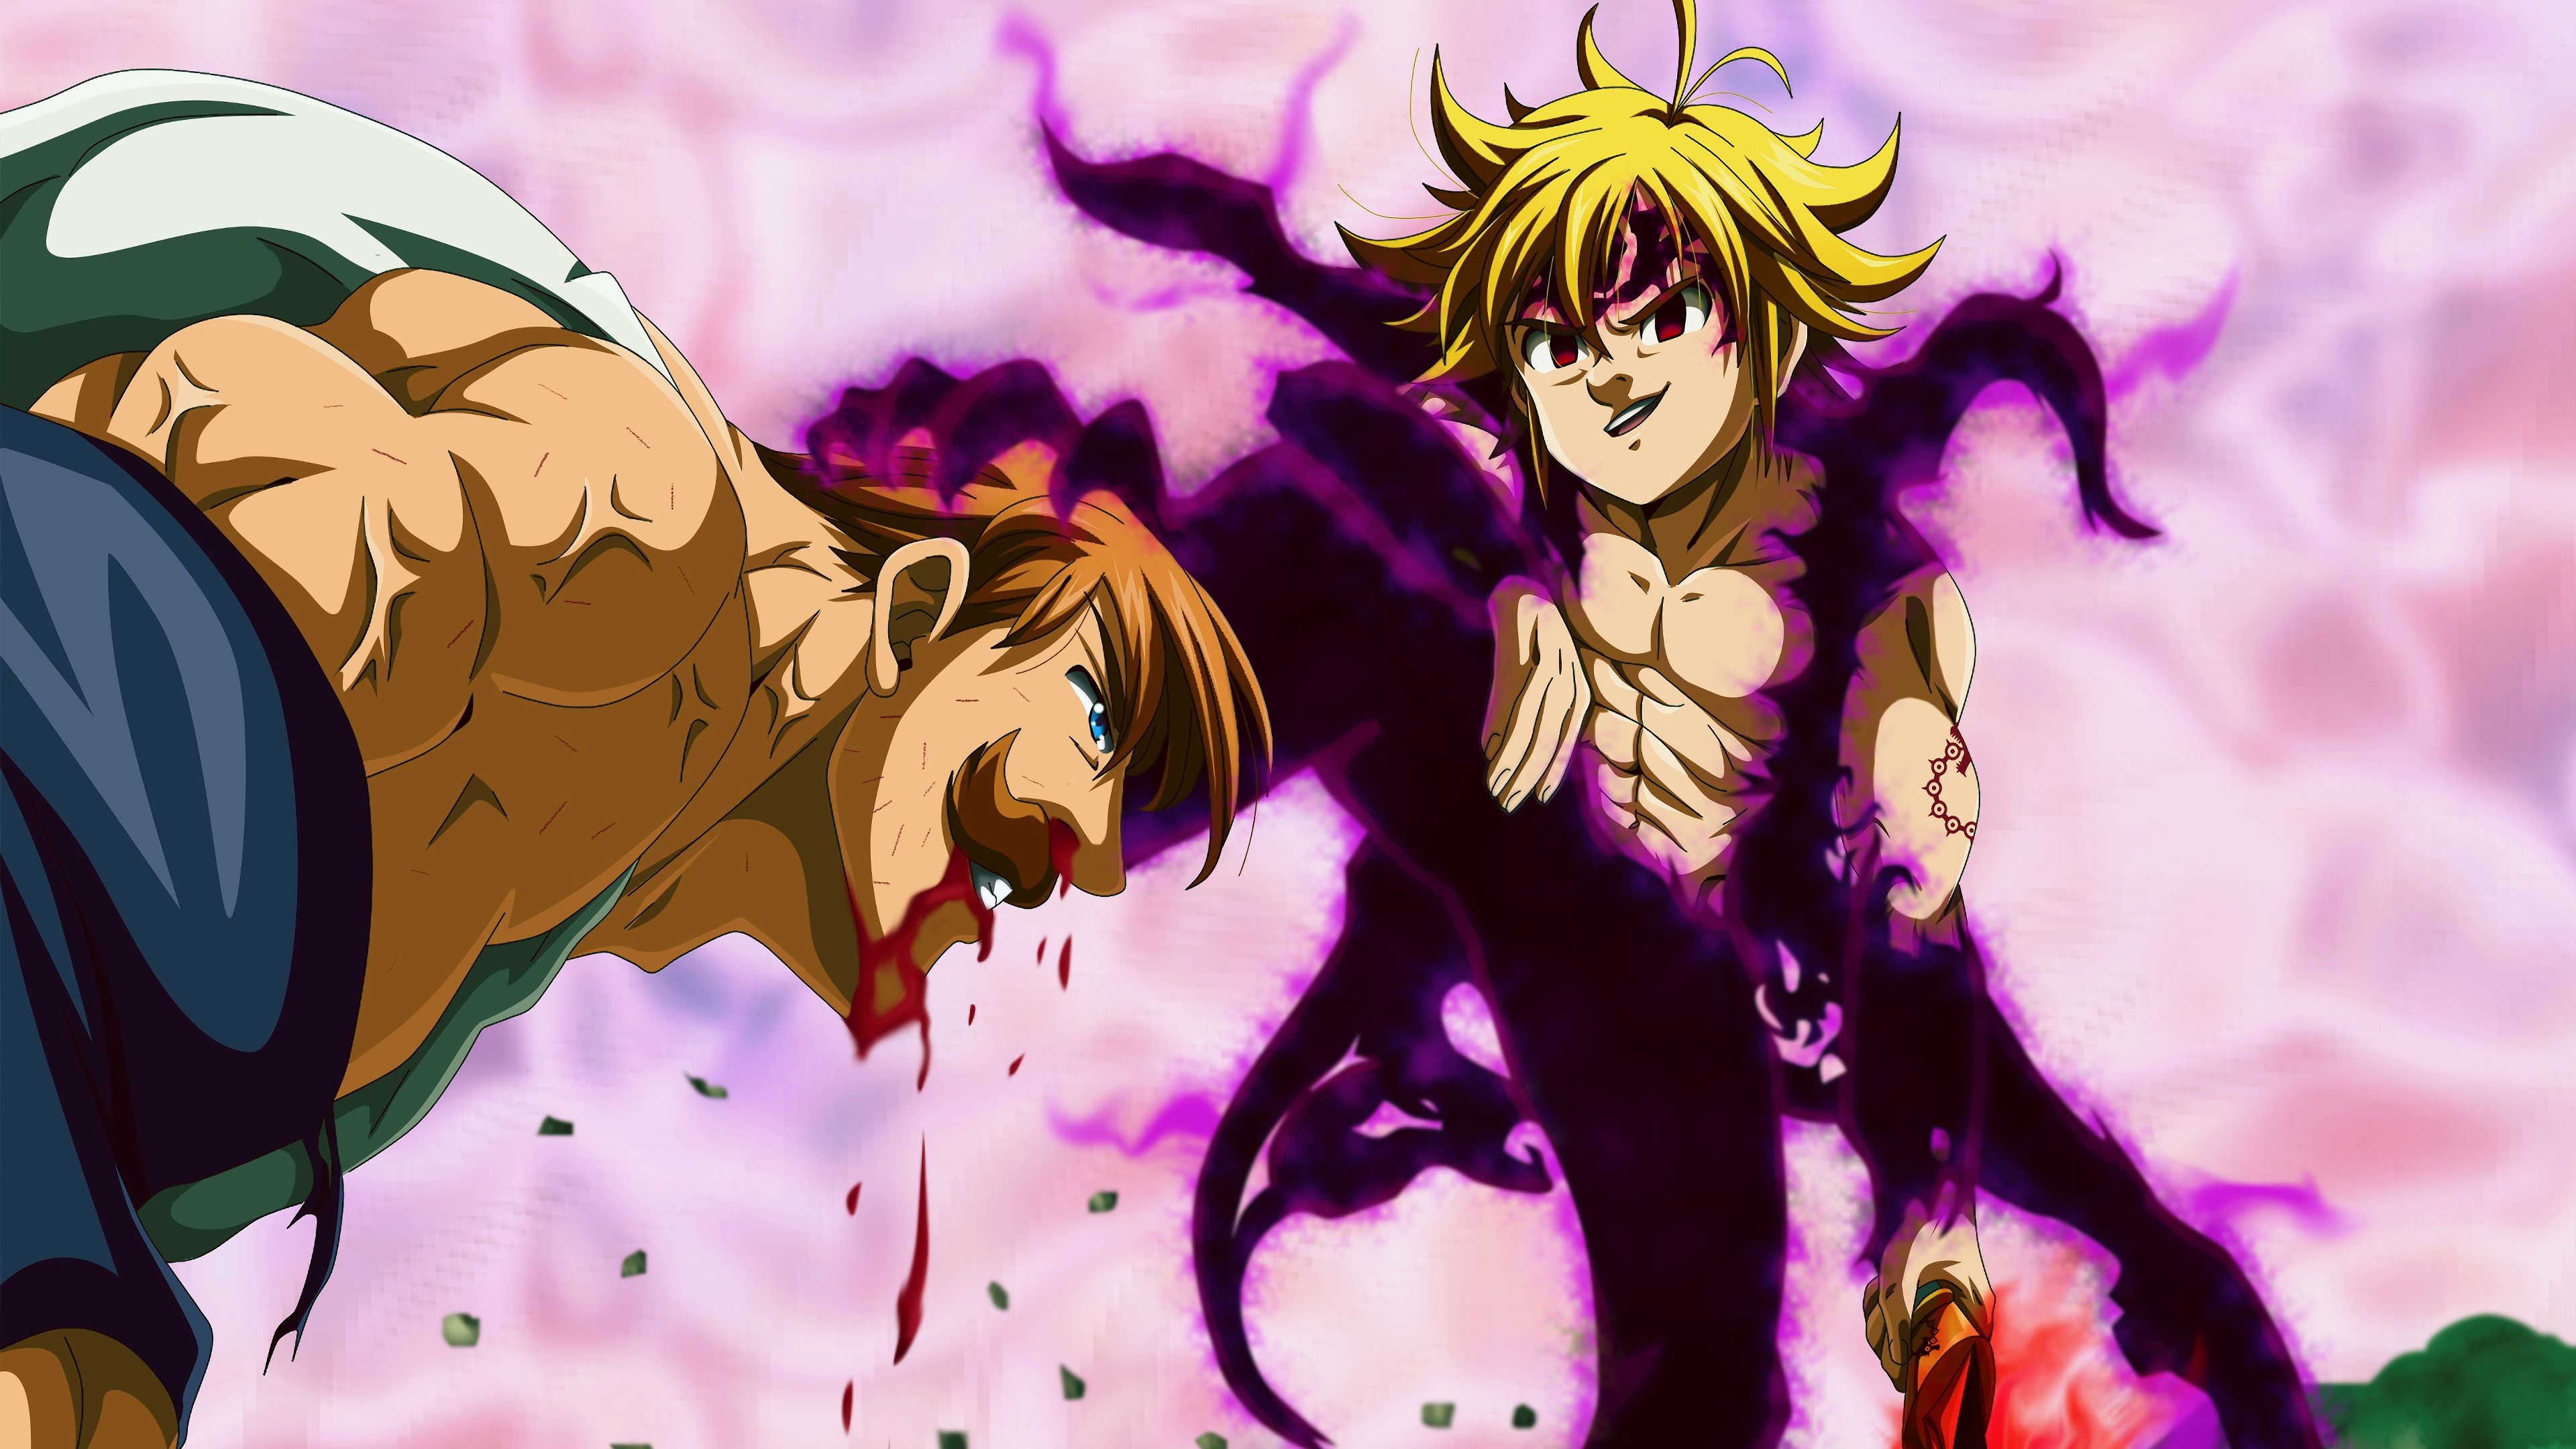 The Seven Deadly Sins 4k Ultra HD Wallpaper. Background Image